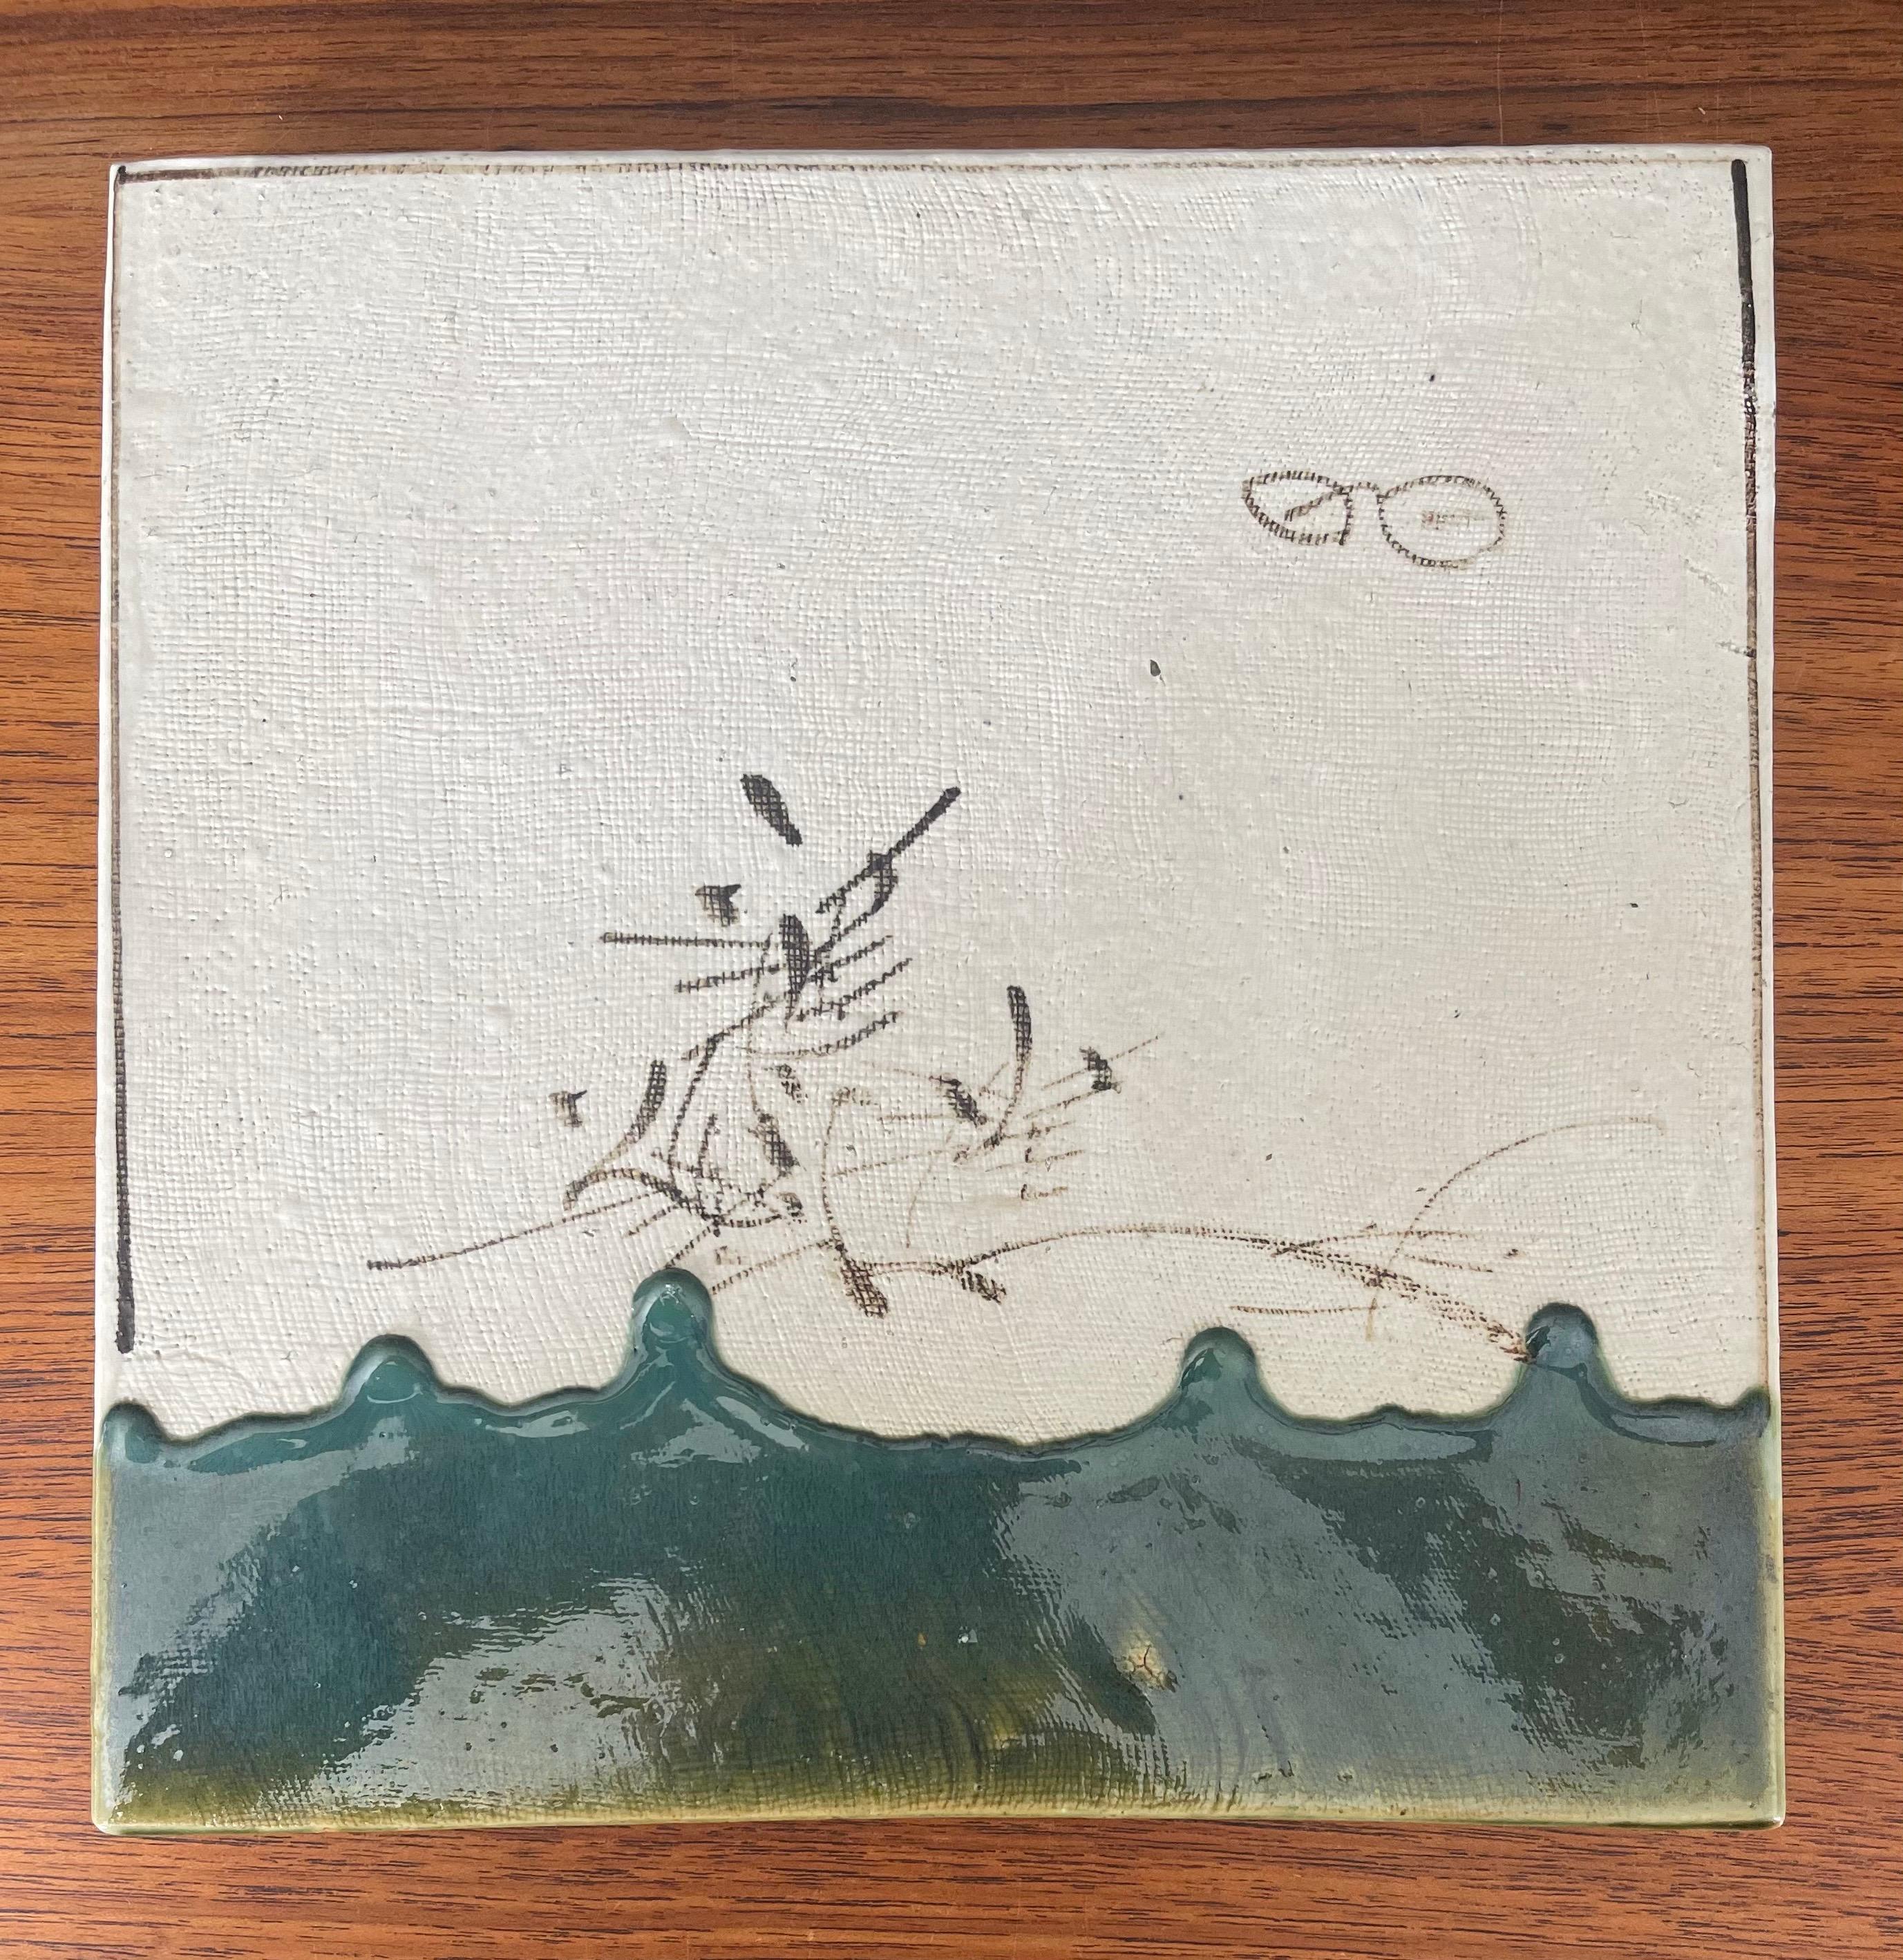 A very cool large Japanese ceramic trivet, circa 1970s. The piece is made of high gloss ceramic and has a hand painted design. The trivet is in good vintage condition and measures 10.75